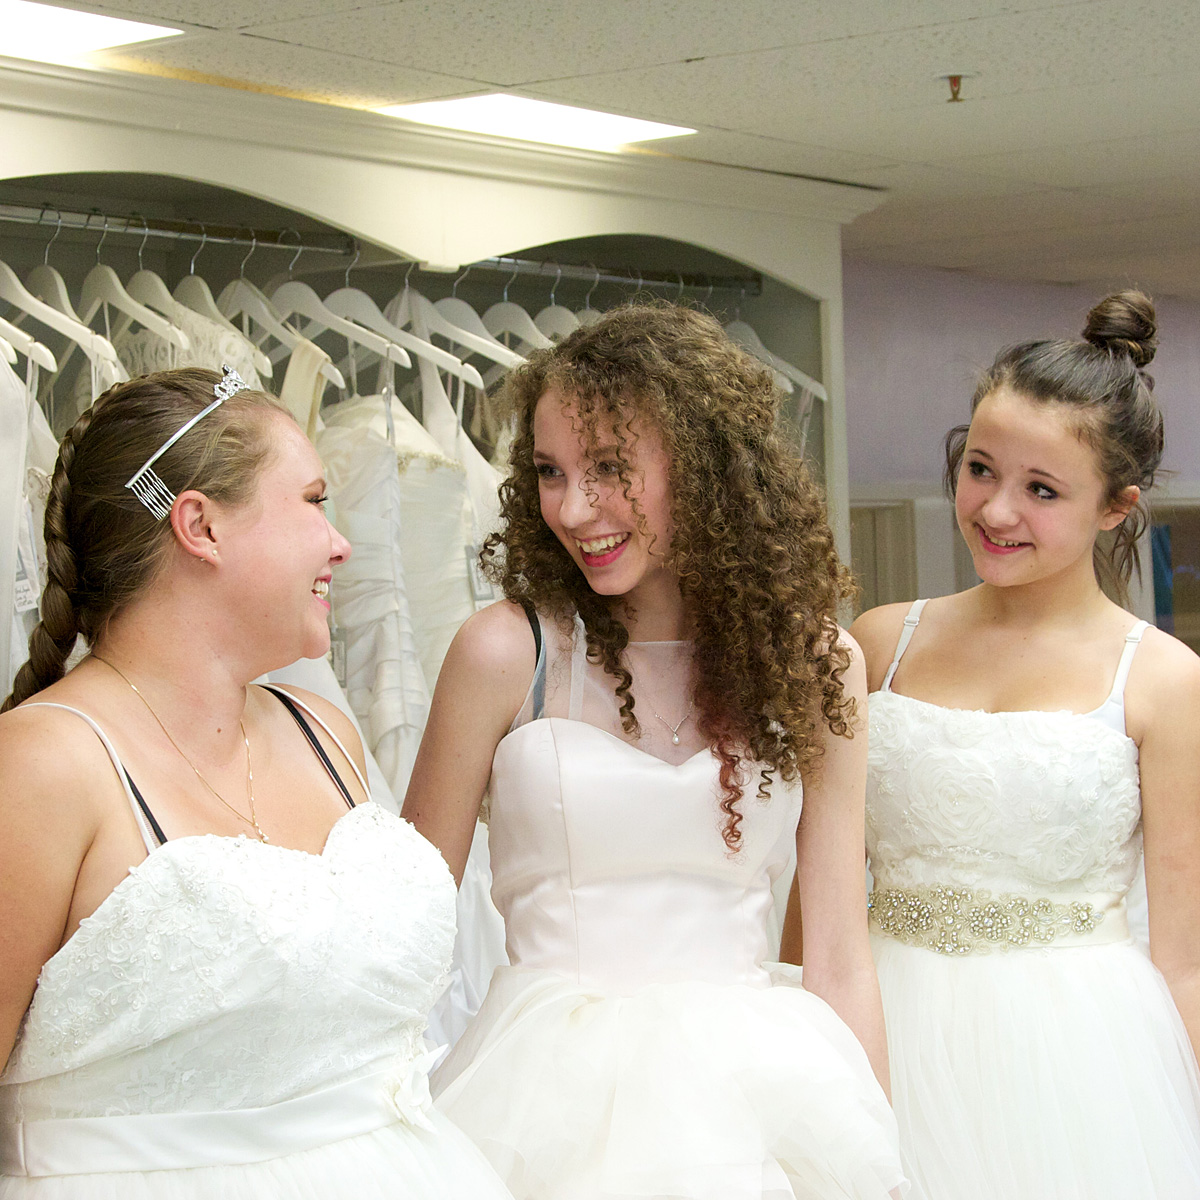 3 sisters trying on wedding dresses